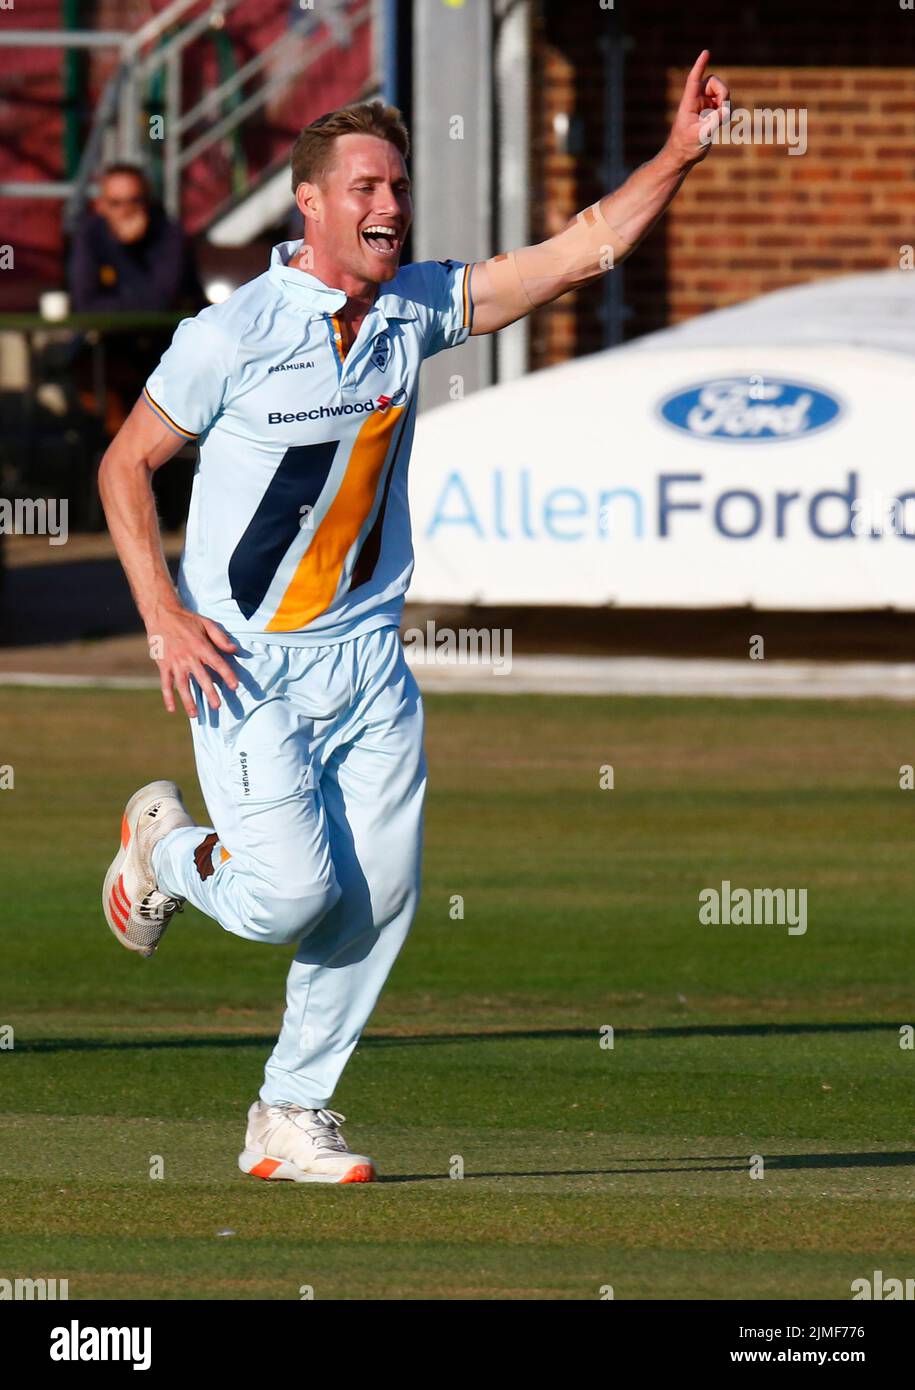 CHELMSFORD ENGLAND - AUGUST  05 : Luis Reece of Derbyshire CCC celebrates the wicket of Essex's Will Buttleman during Royal London One-Day Cup match b Stock Photo